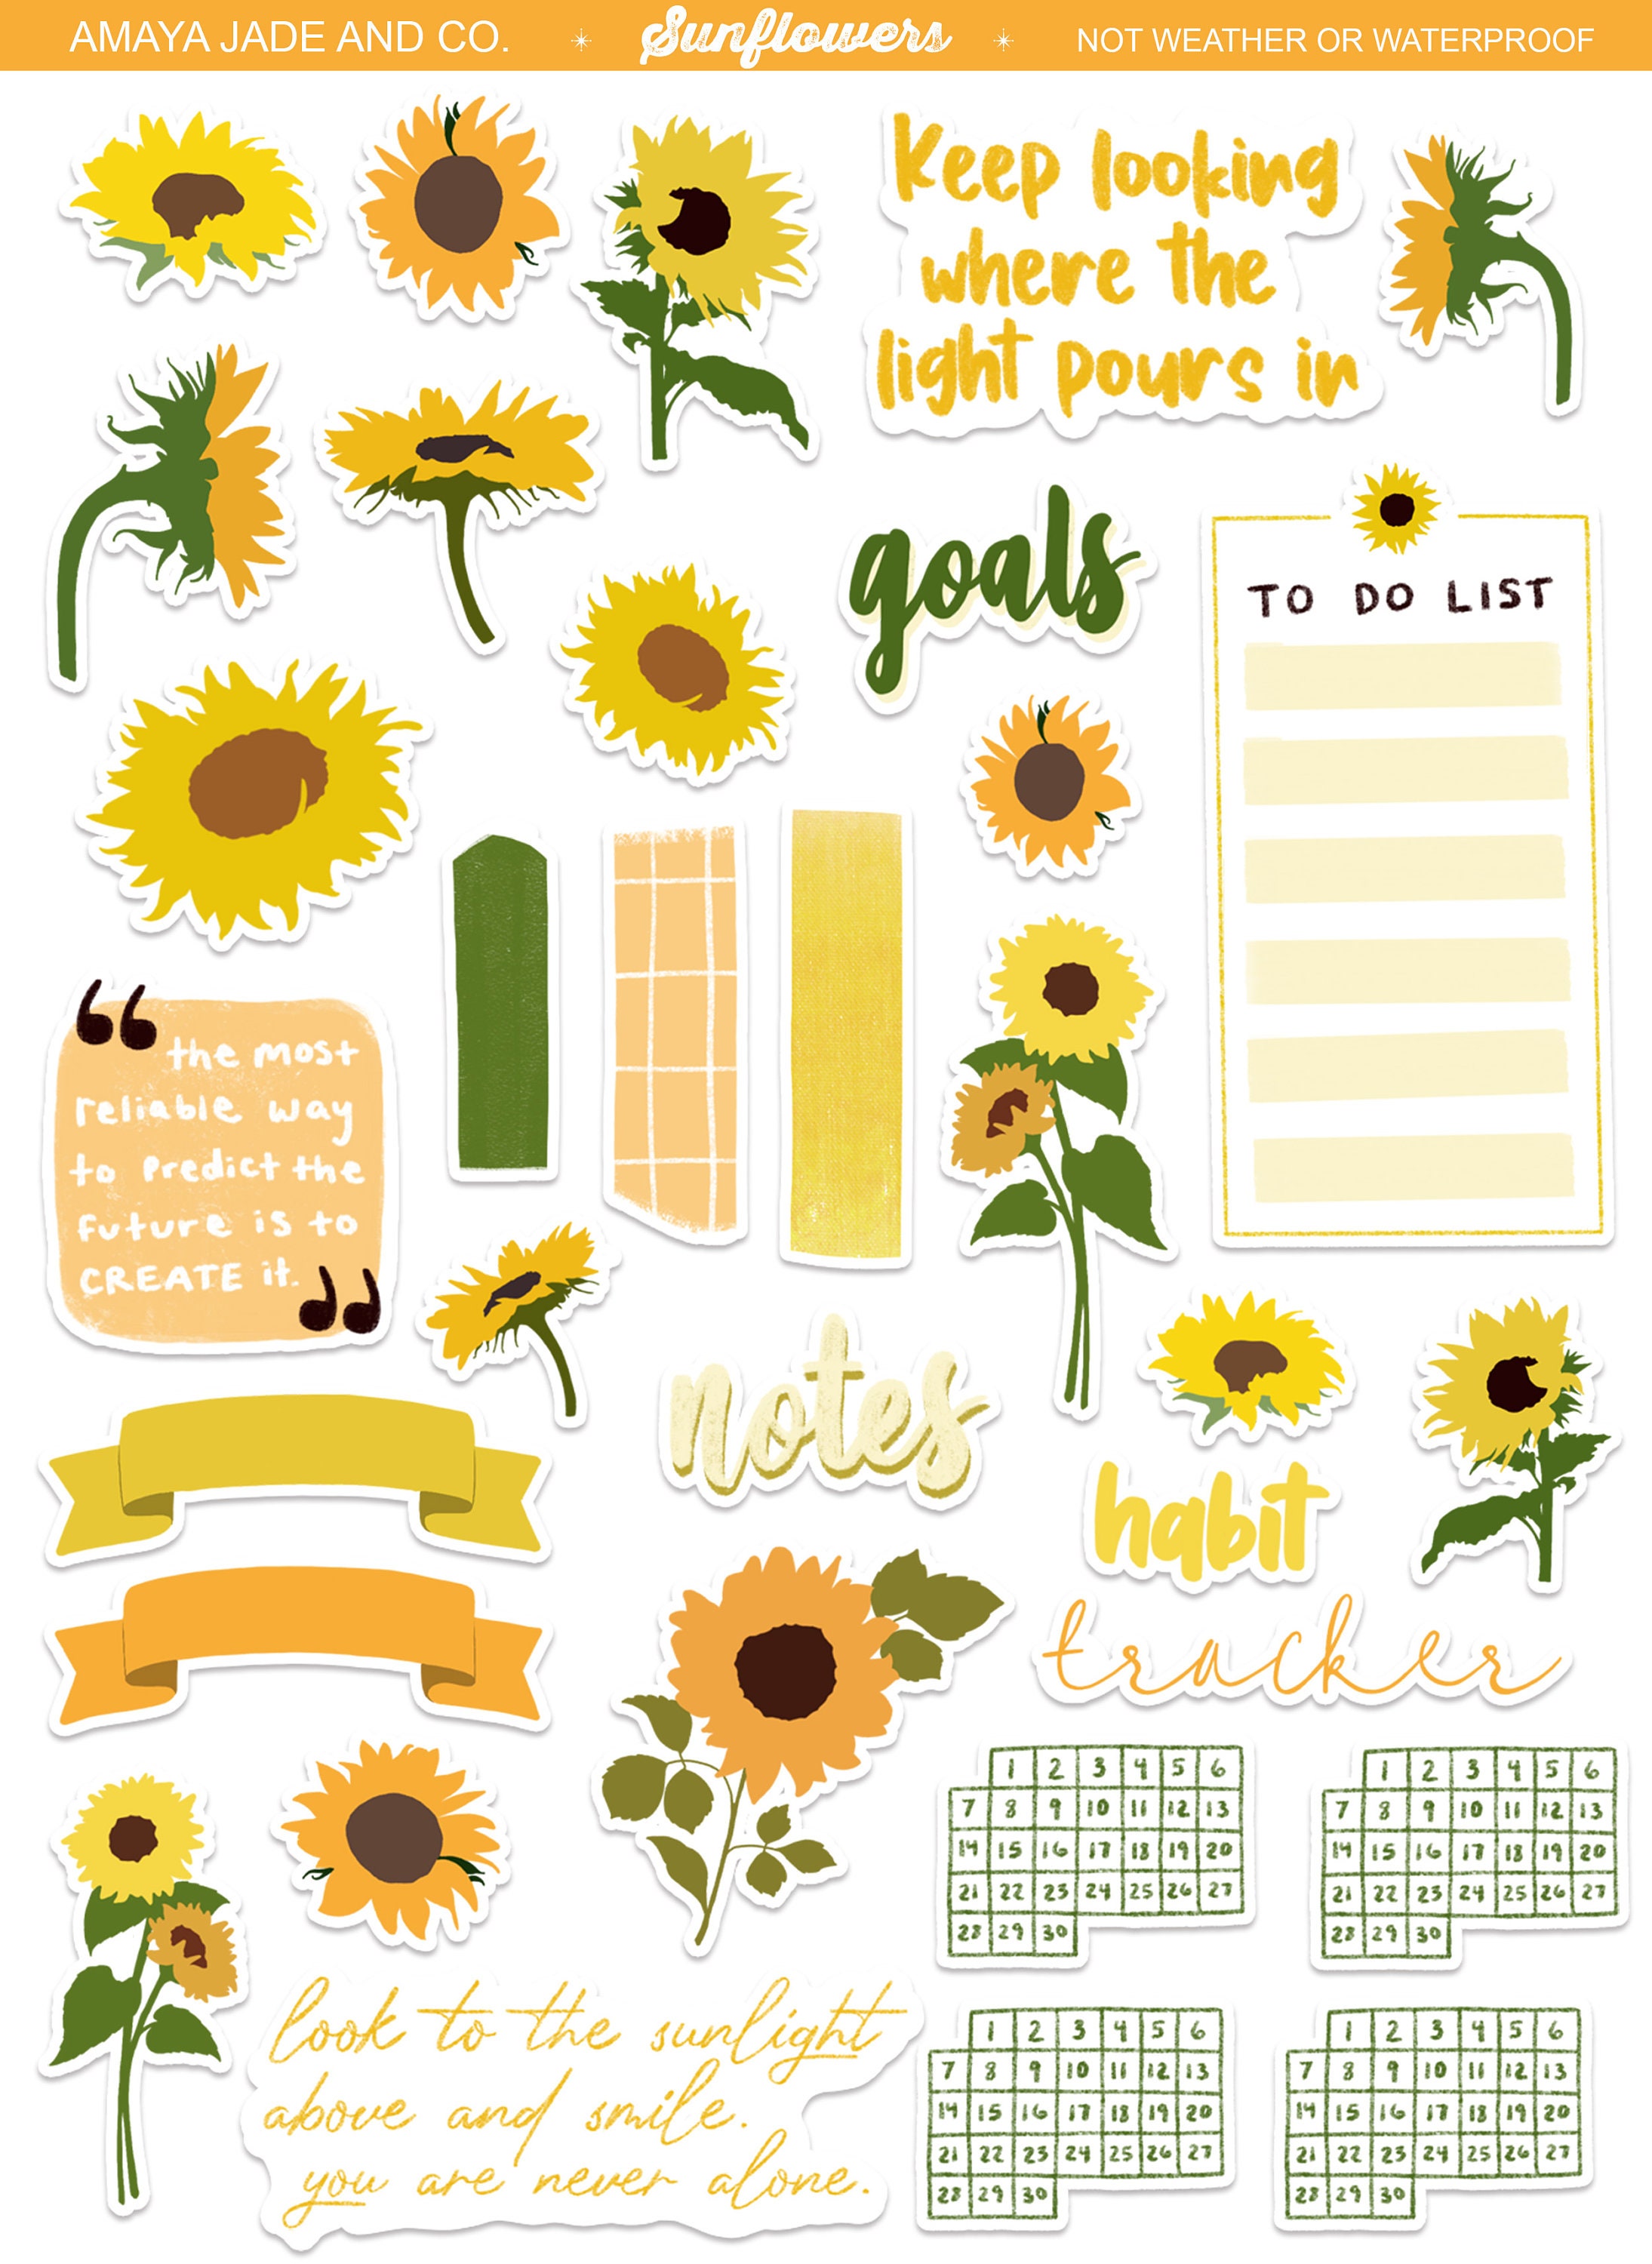 Creatures of the Night Journal Kit Printable Planner Stickers — Sunflower  Child Designs